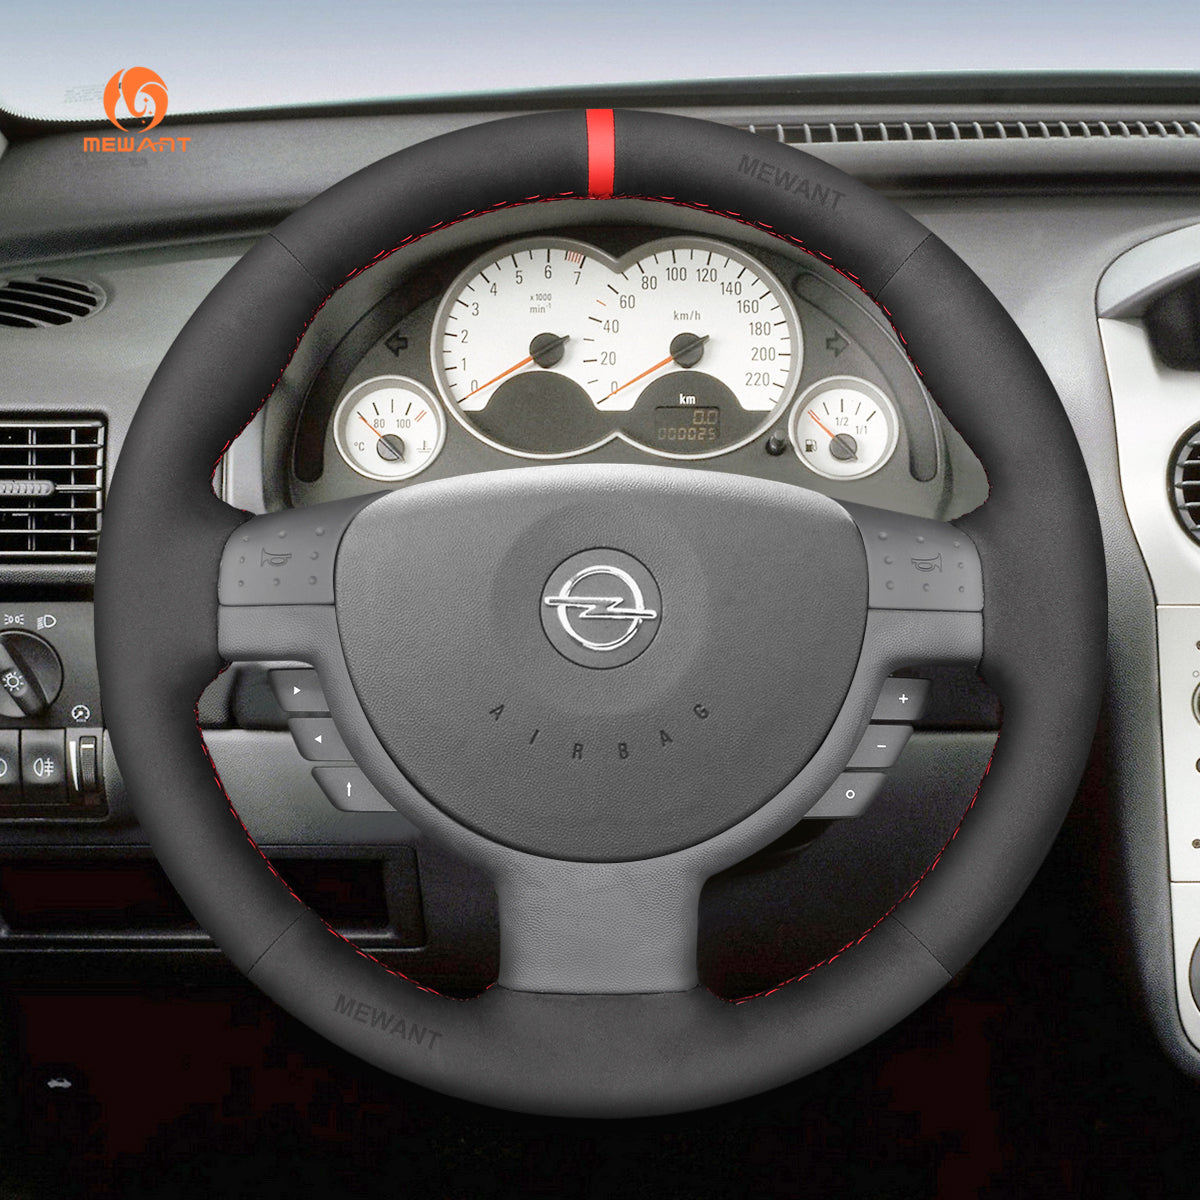 MEWANT DIY Leather Suede Car Steering Wheel Cover for Opel Corsa C Combo C Vauxhall Corsa C Holden Barina Tigra